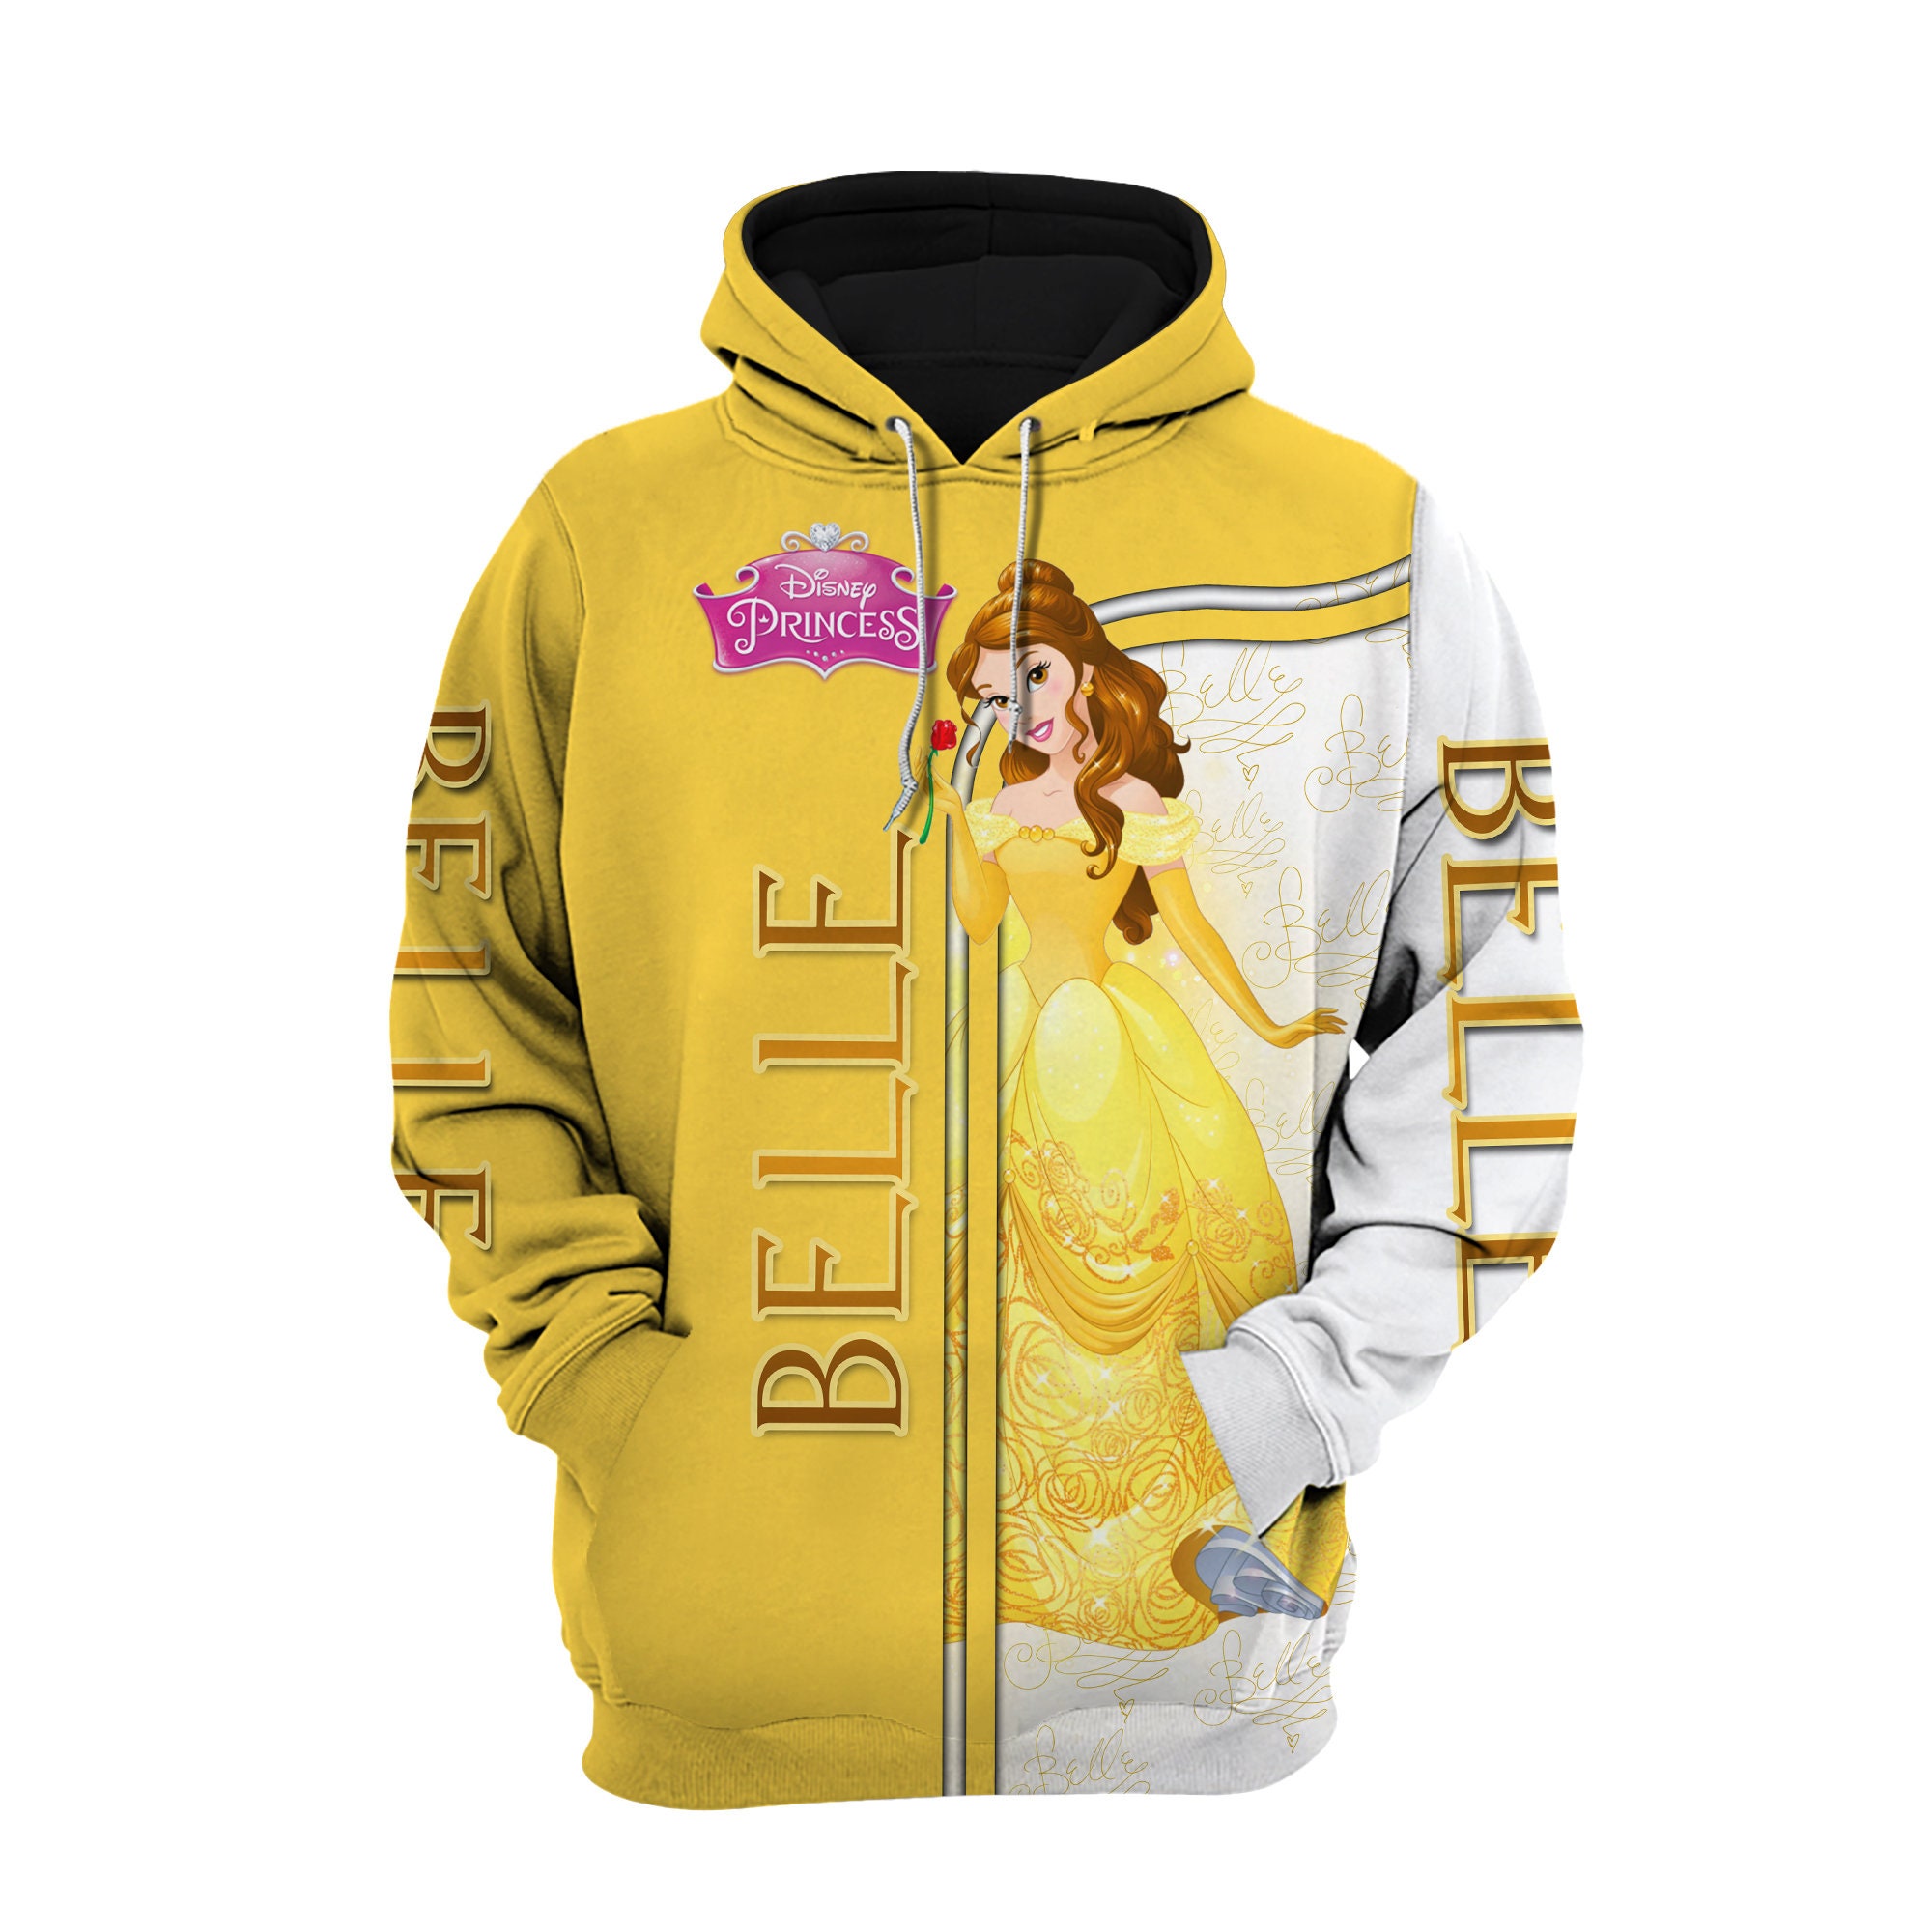 Discover Belle Disney Princess Beauty and the Beast 3D Hoodie